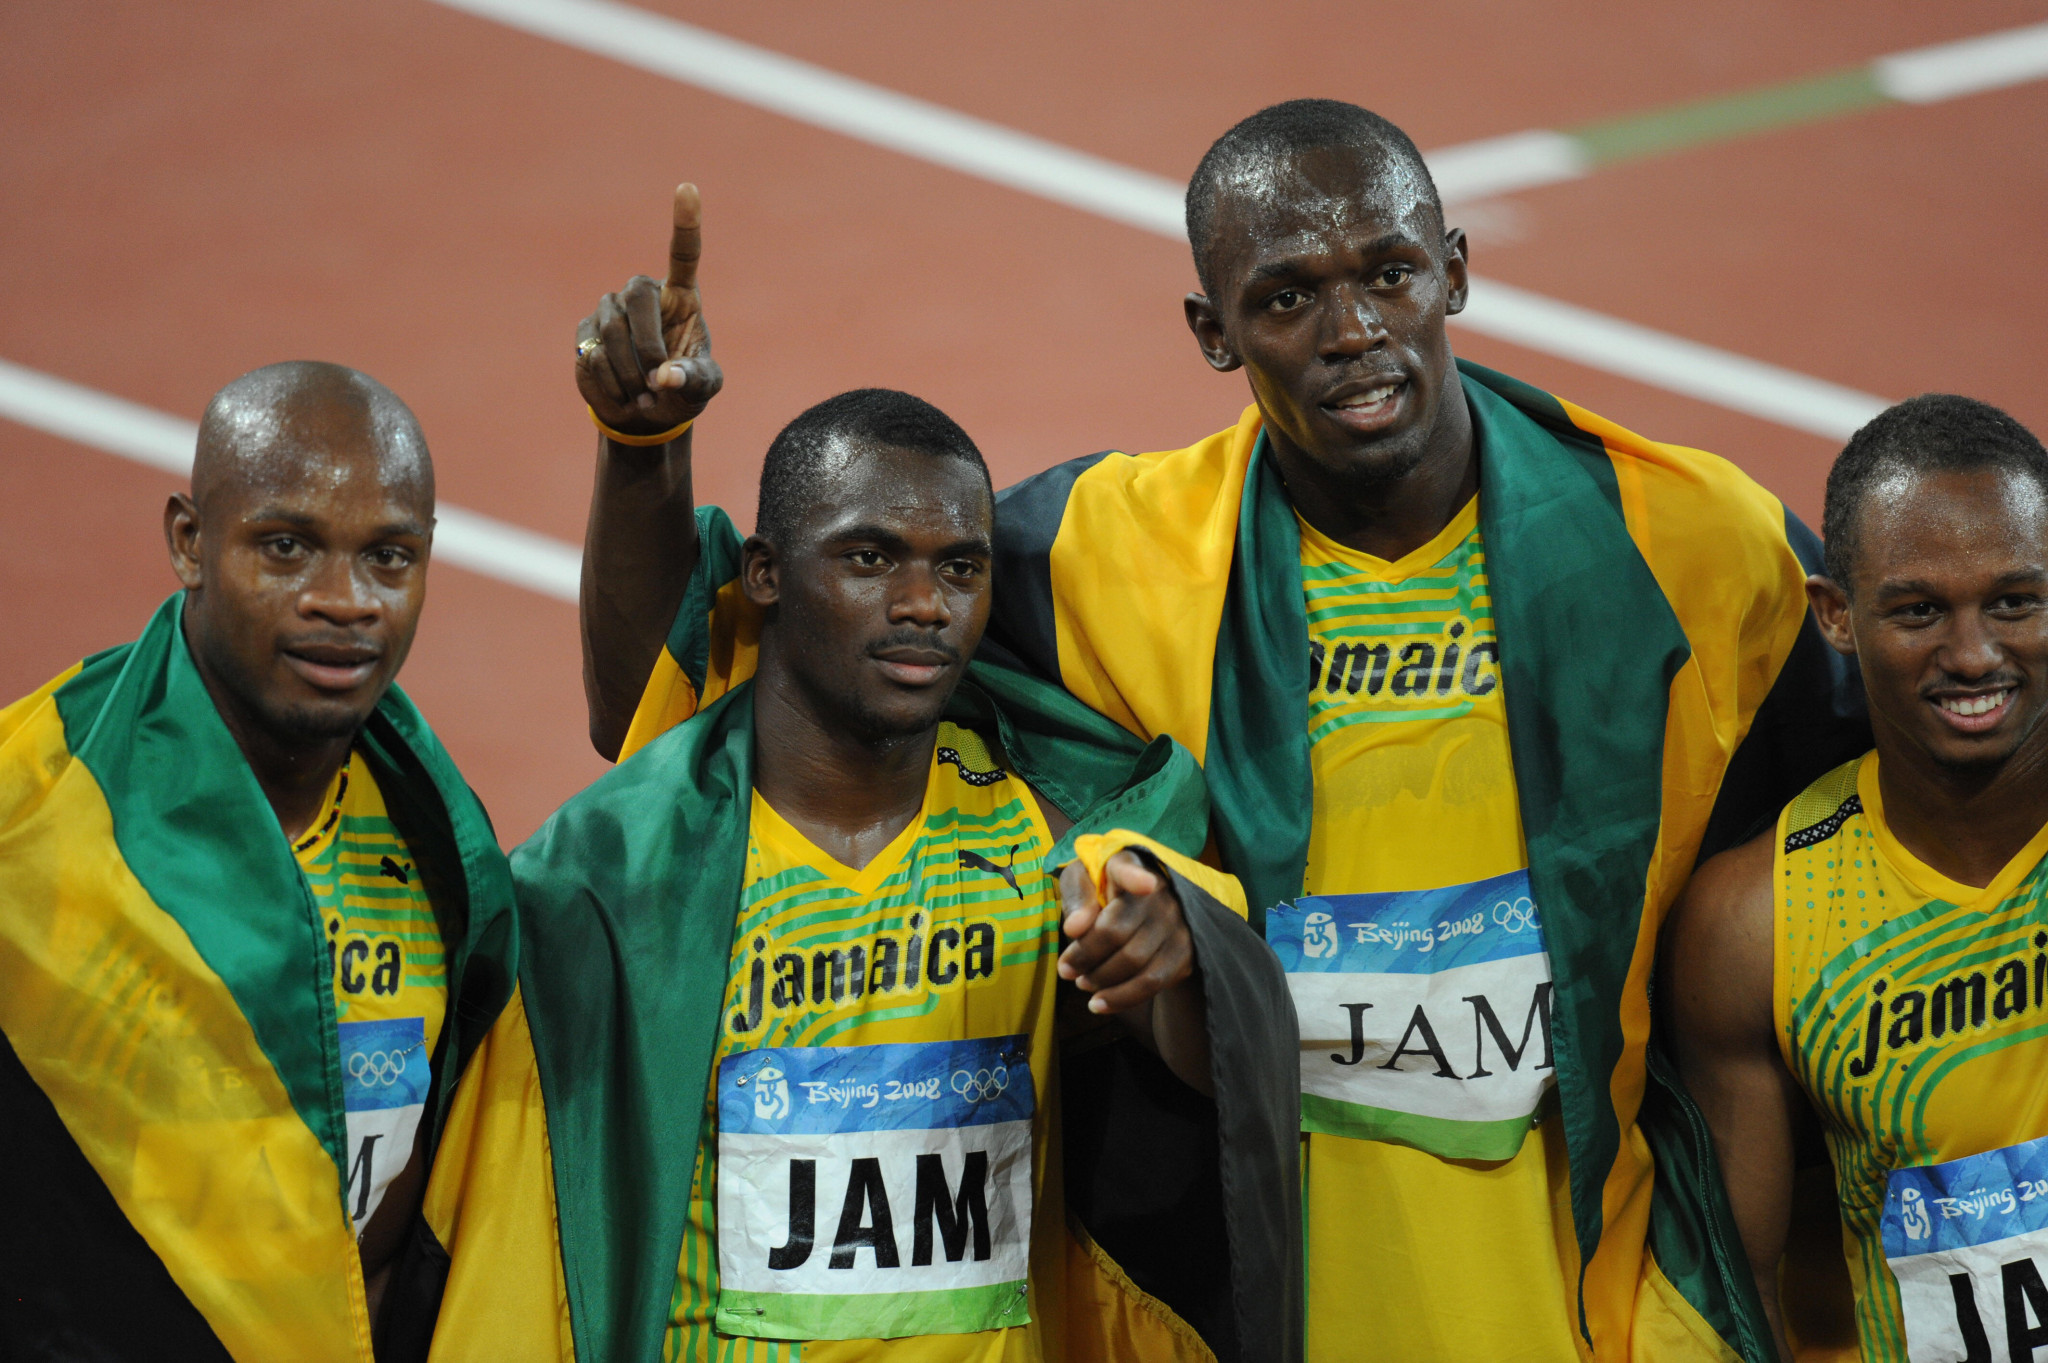 Nesta Carter, second left, was disqualified by the IOC after a retest showed a positive test for banned stimulant 4-methylhexan-2-amin, leading to Jamaica being stripped of the Olympic 4x100m gold medal from Beijing 2008 ©Getty Images